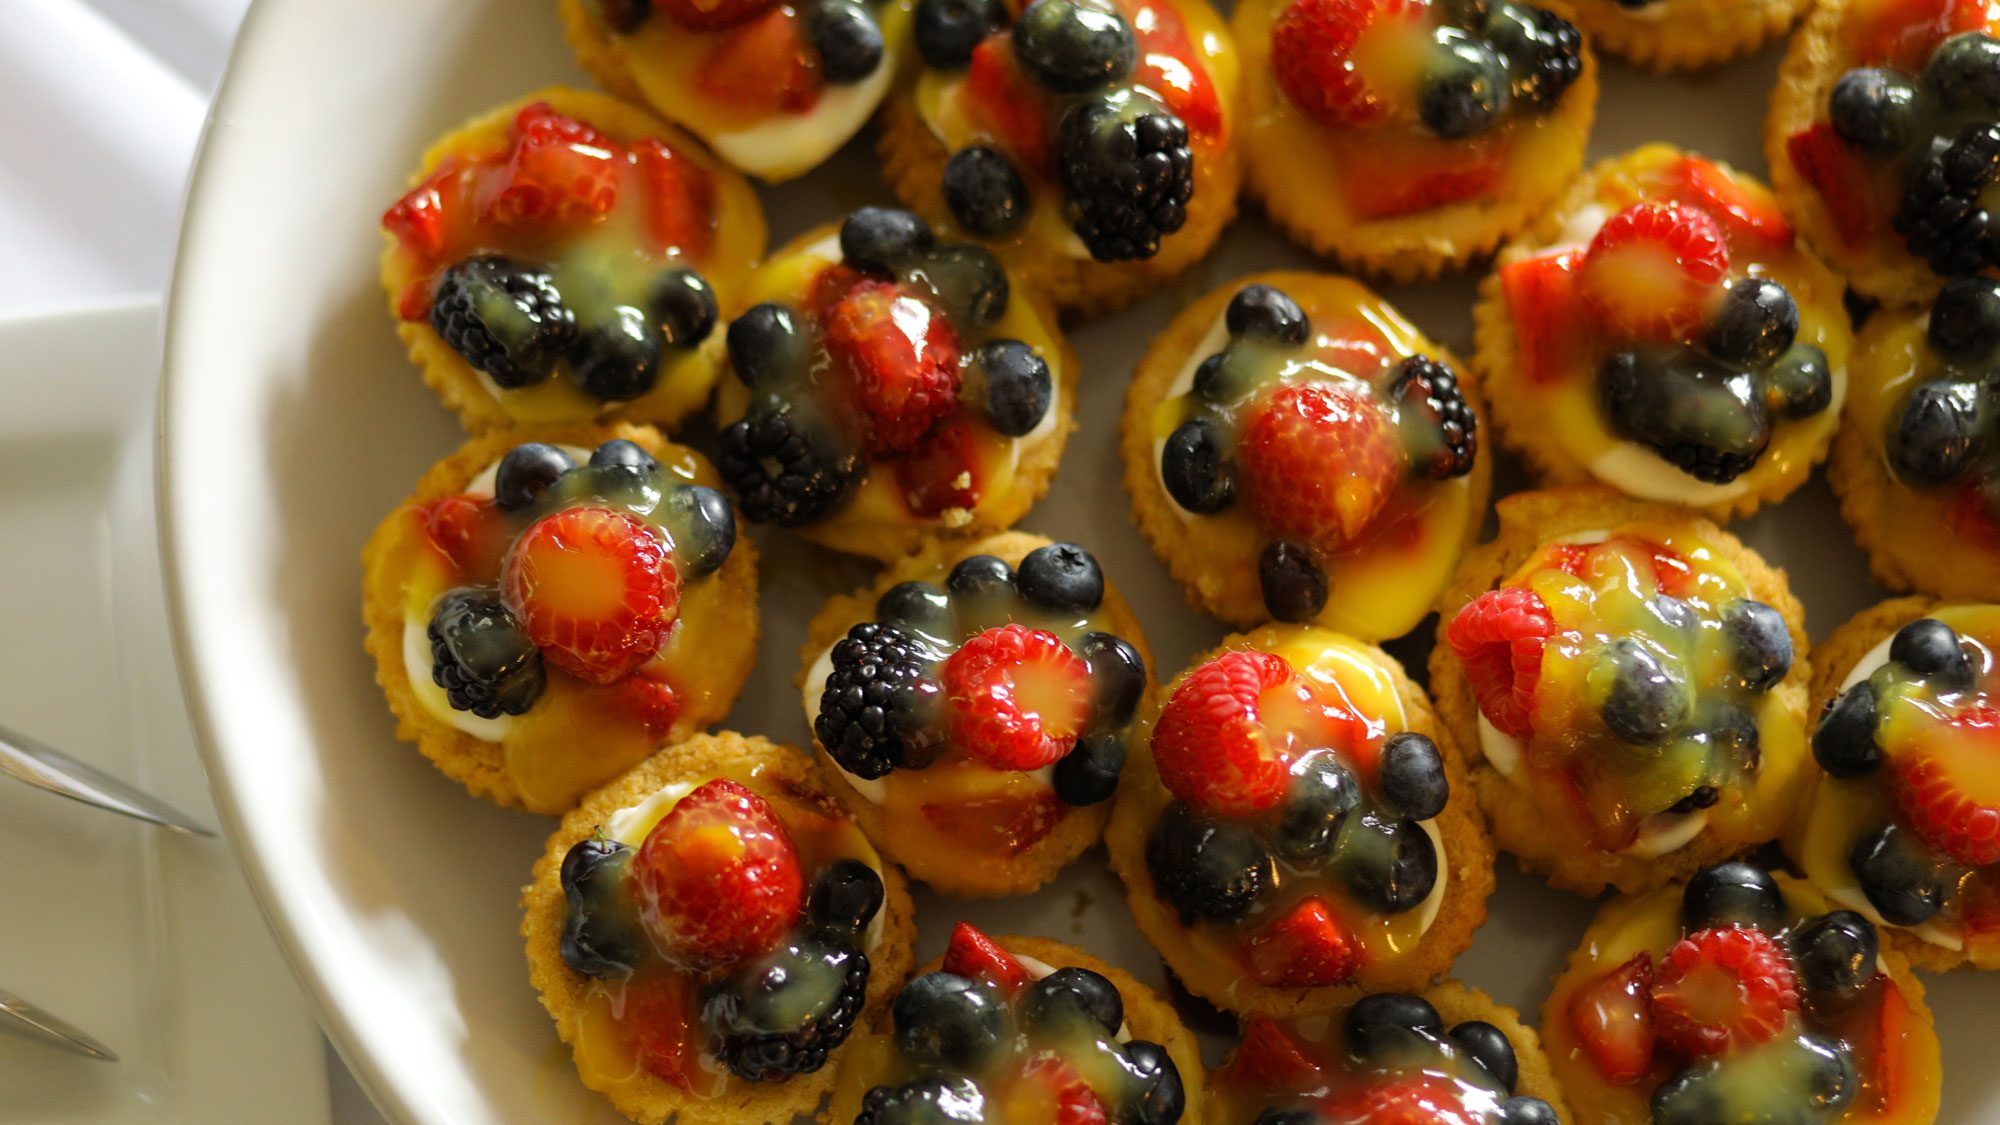 Tarts with berries and lemon sauce